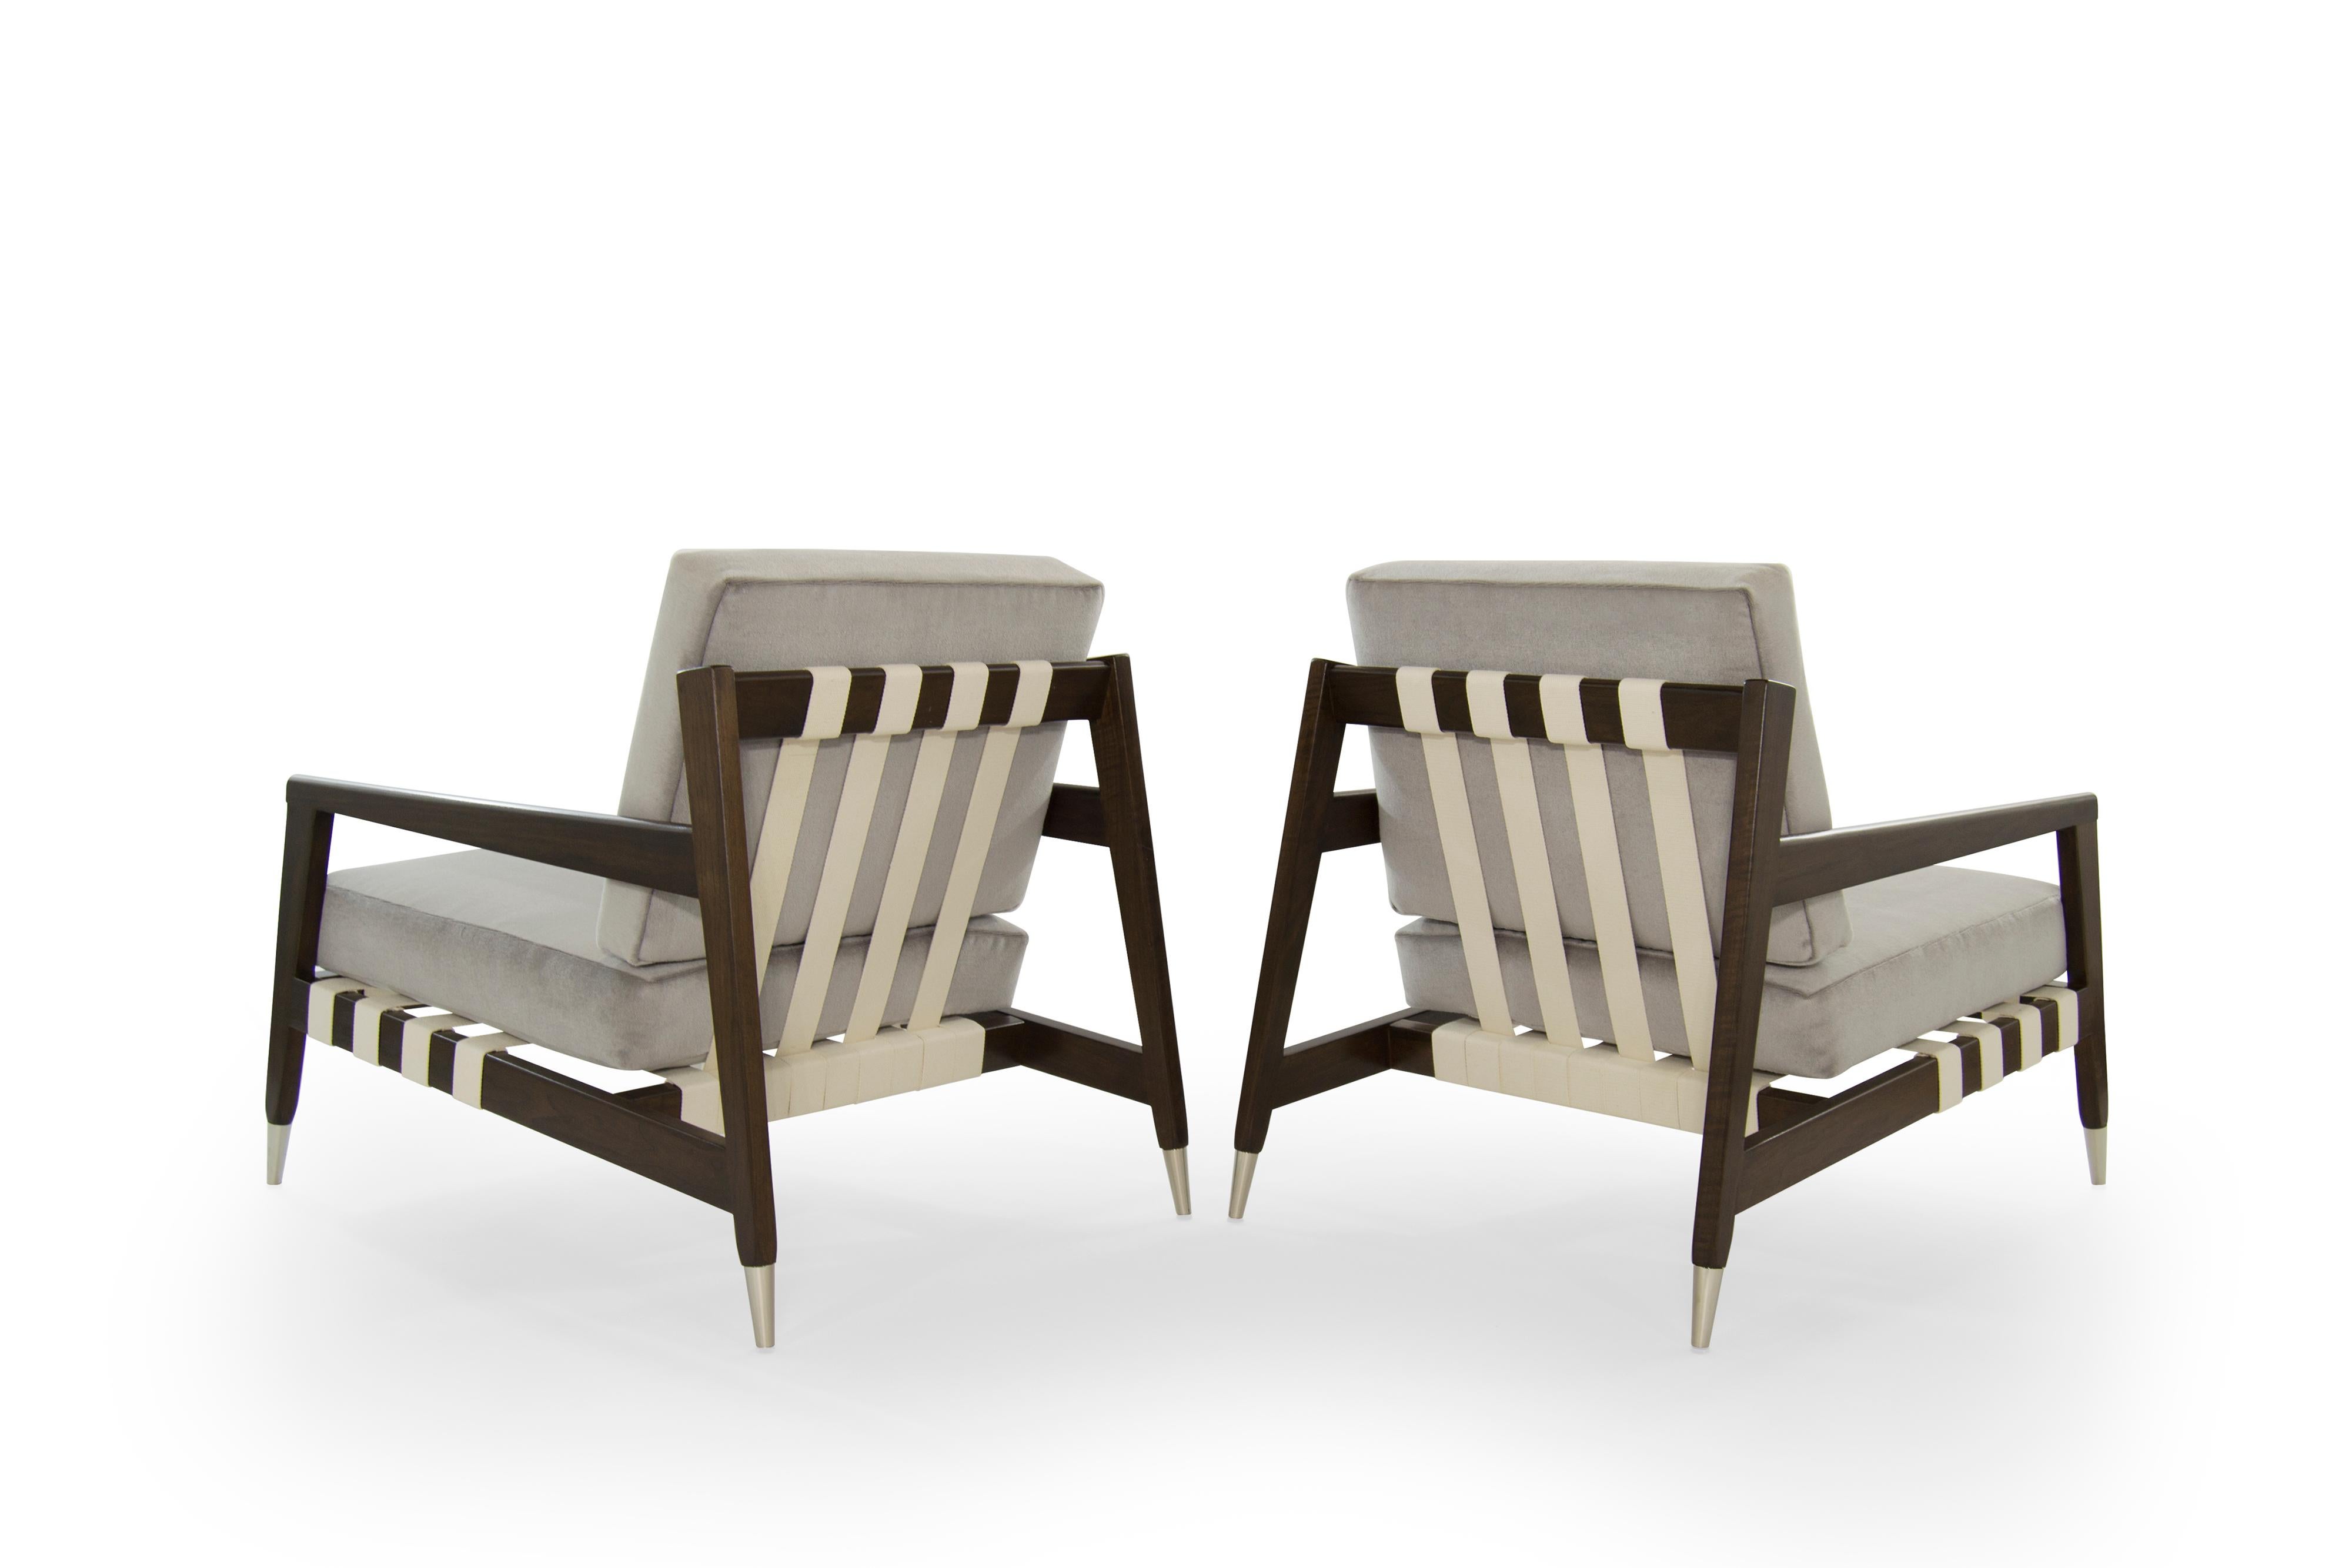 20th Century Rare Edmond Spence Strapped Lounge Chairs, 1950s